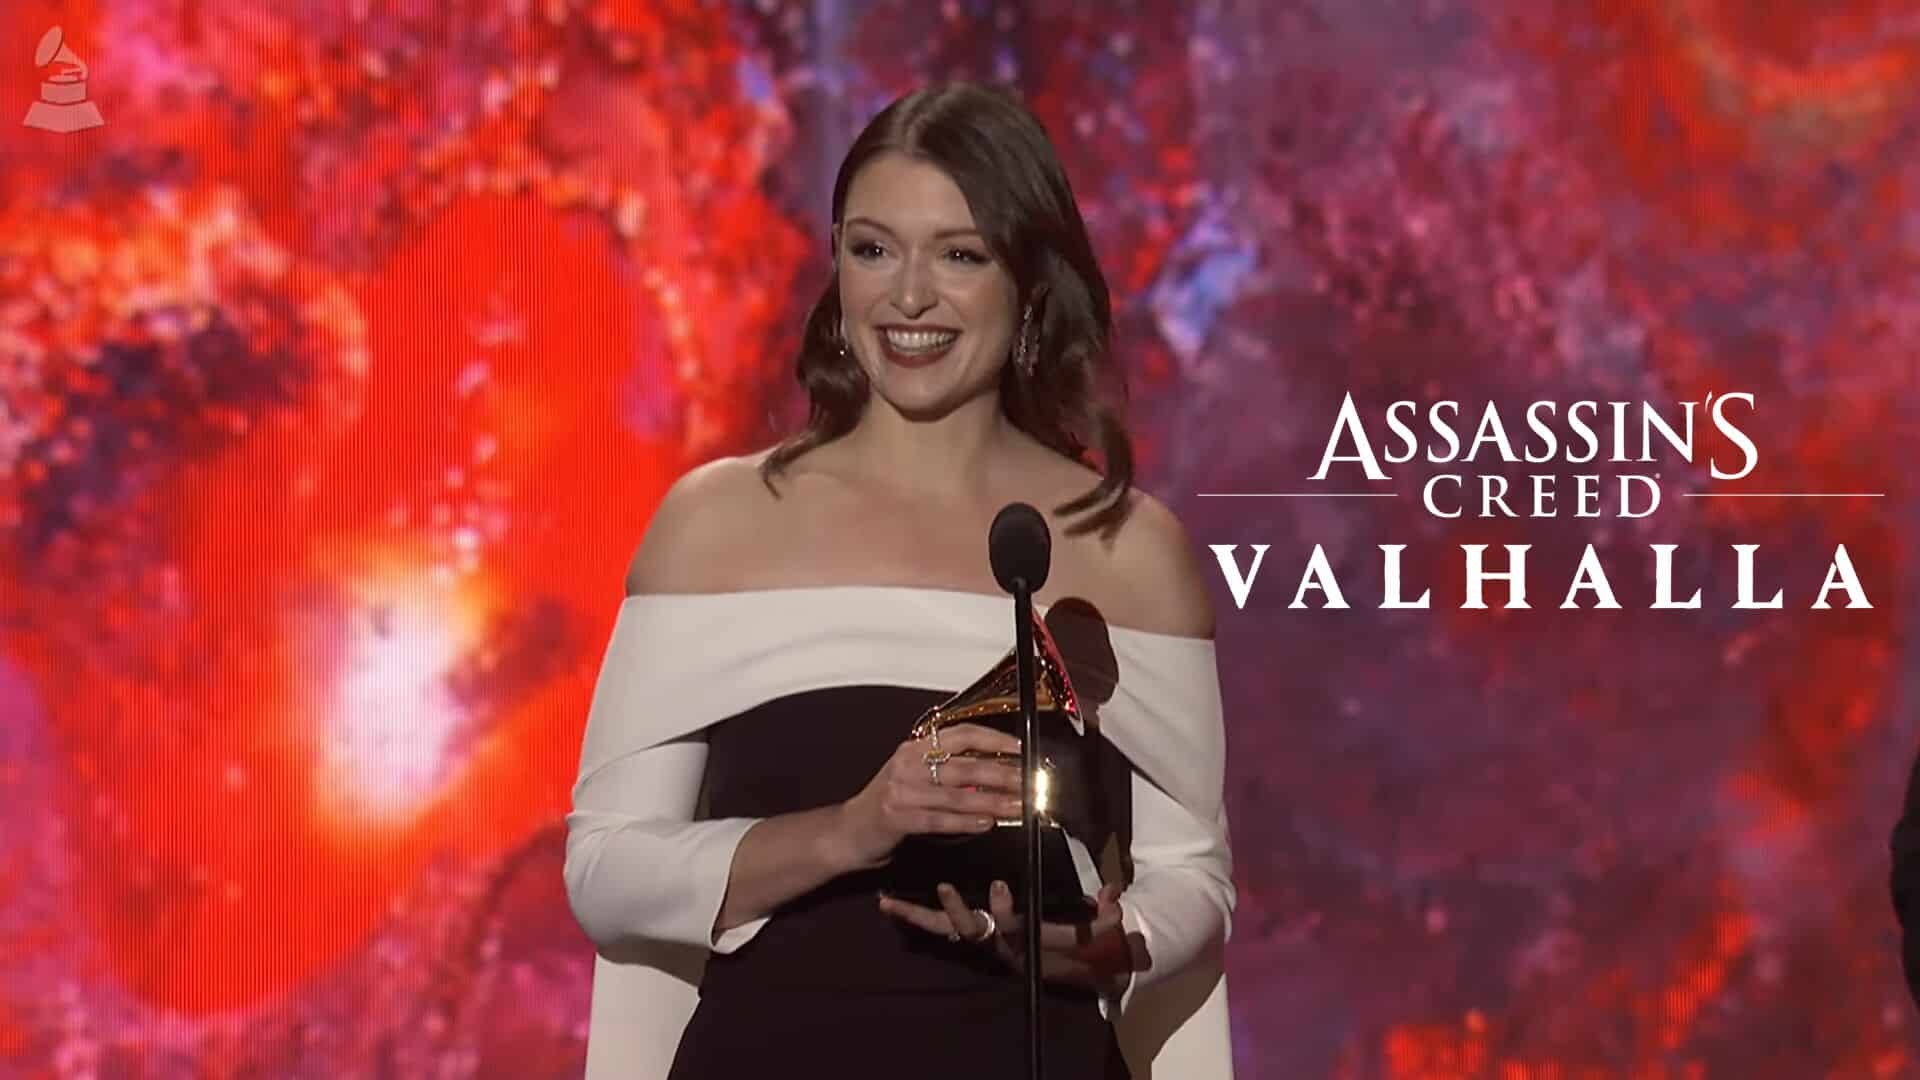 First Video Games Soundtrack Grammy Awards Winner is Stephanie Economou's Assassin's Creed Valhalla